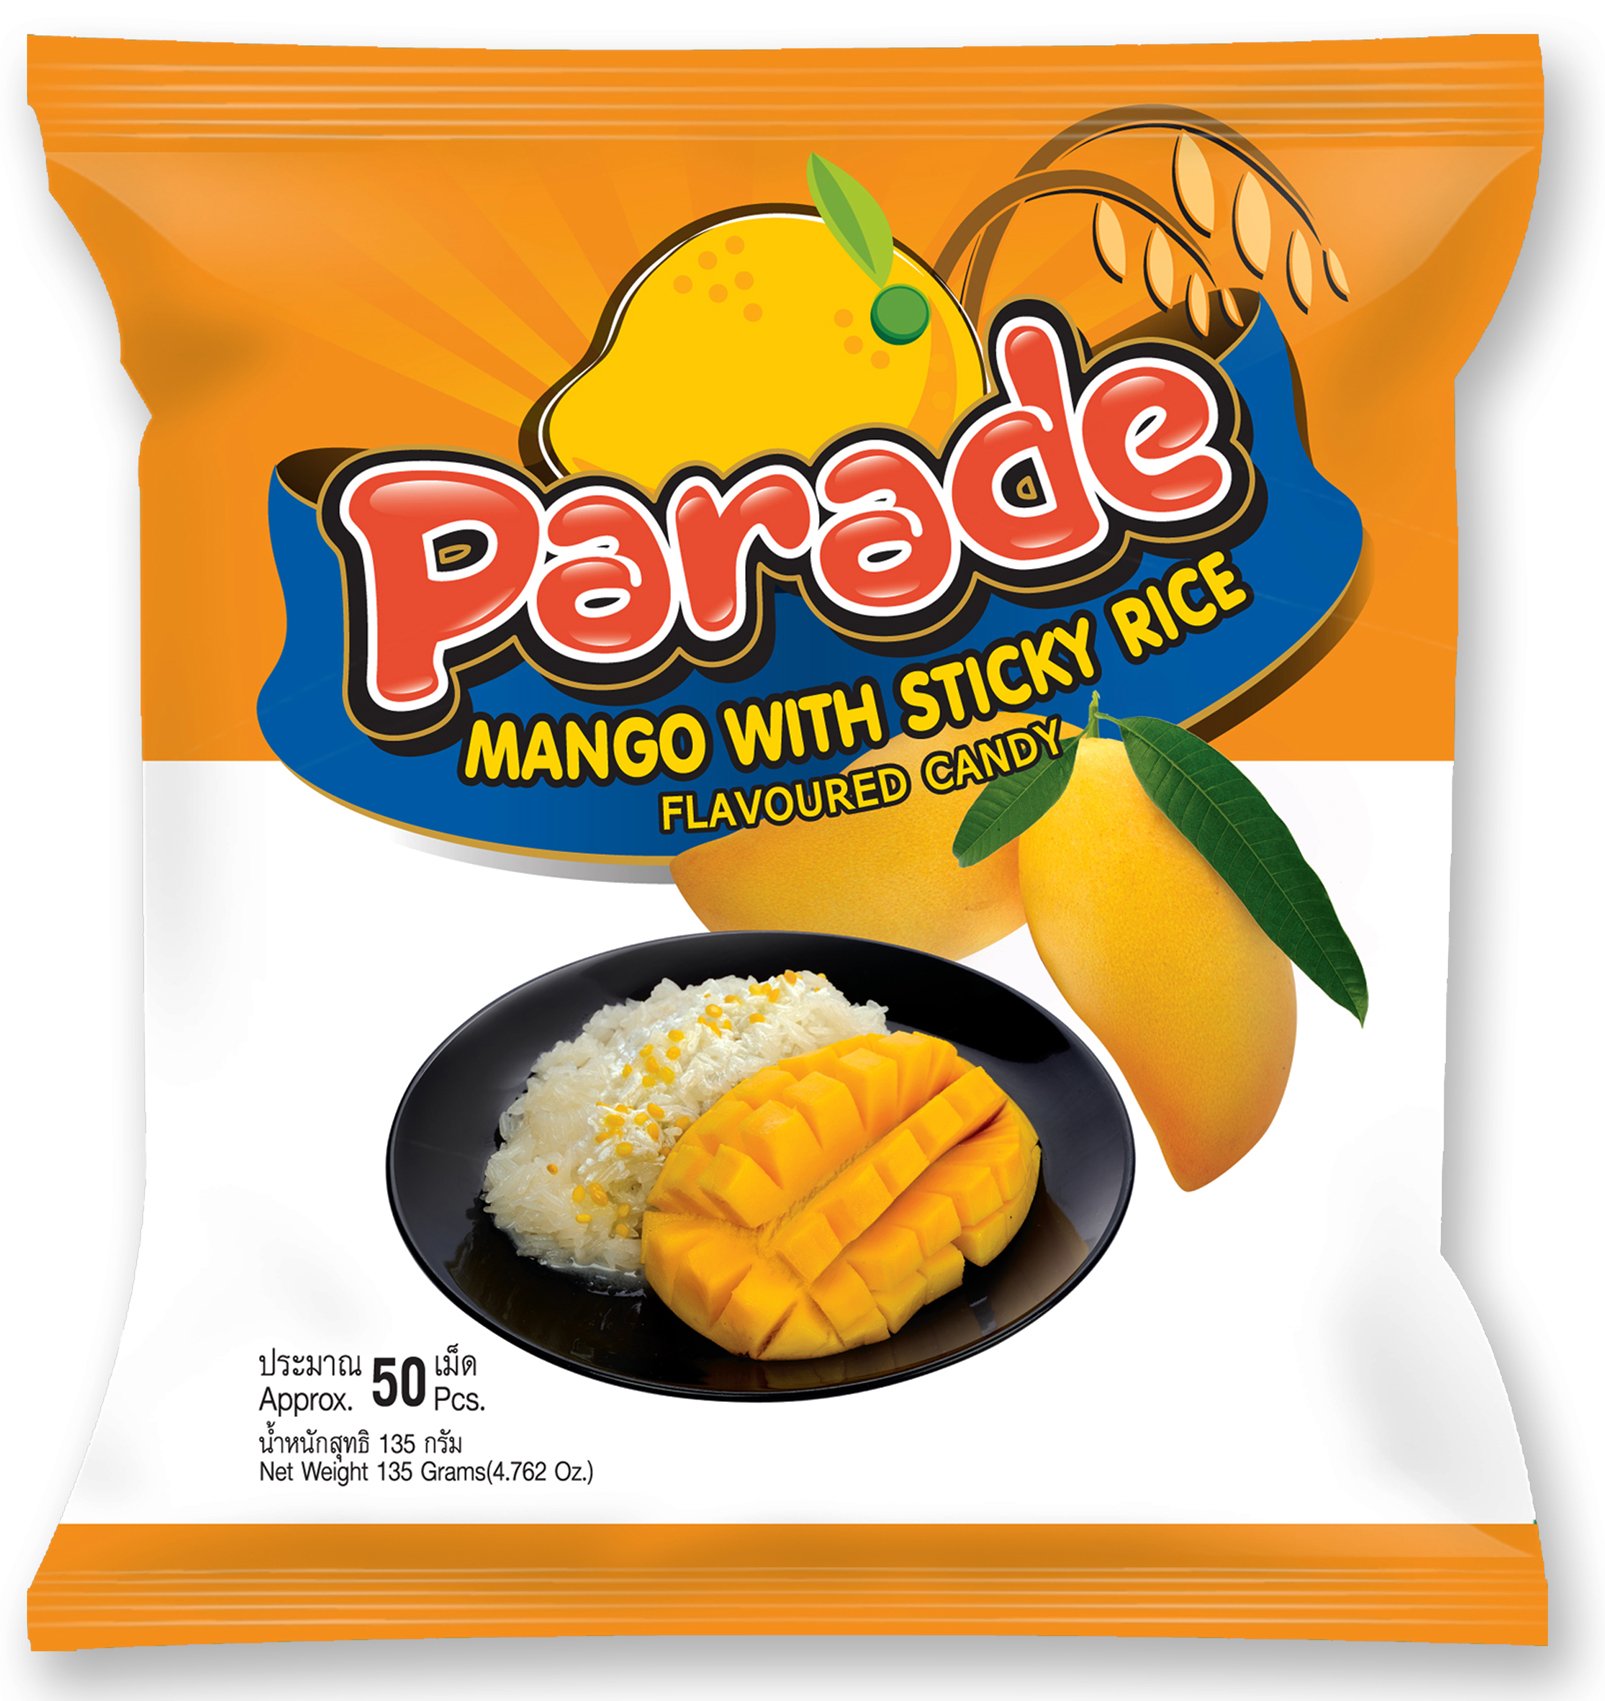 Parade Mango with Sticky Rice Flavoured Candy